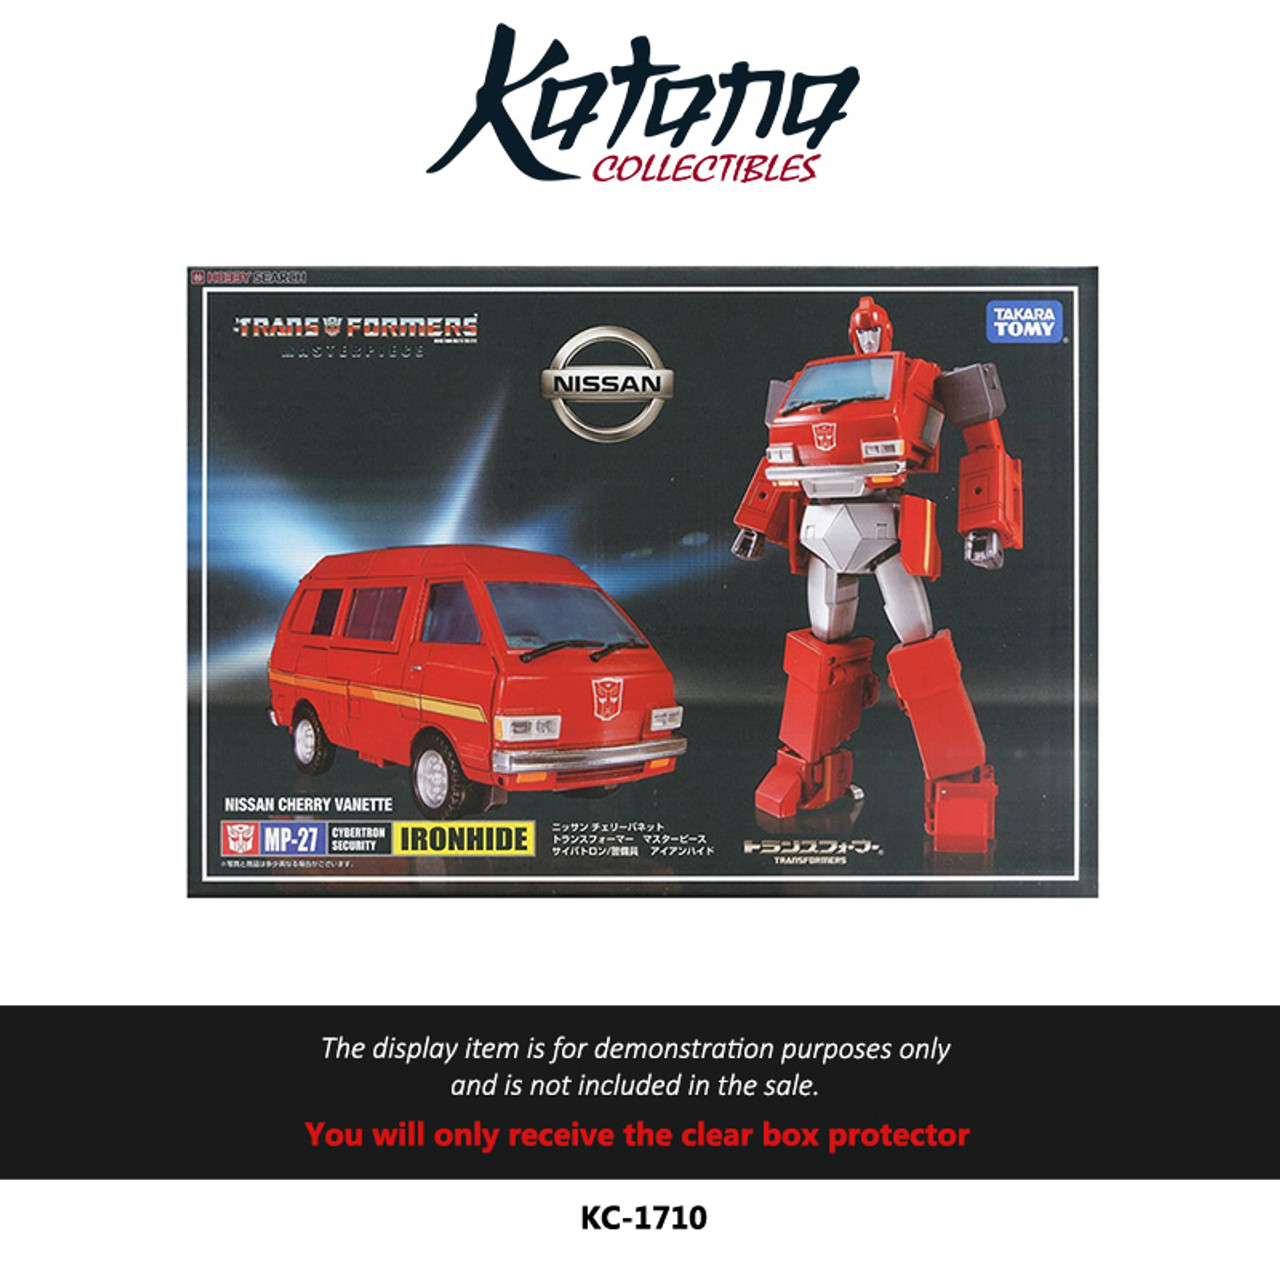 Katana Collectibles Protector For Transformers Masterpiece Ironhide MP-27